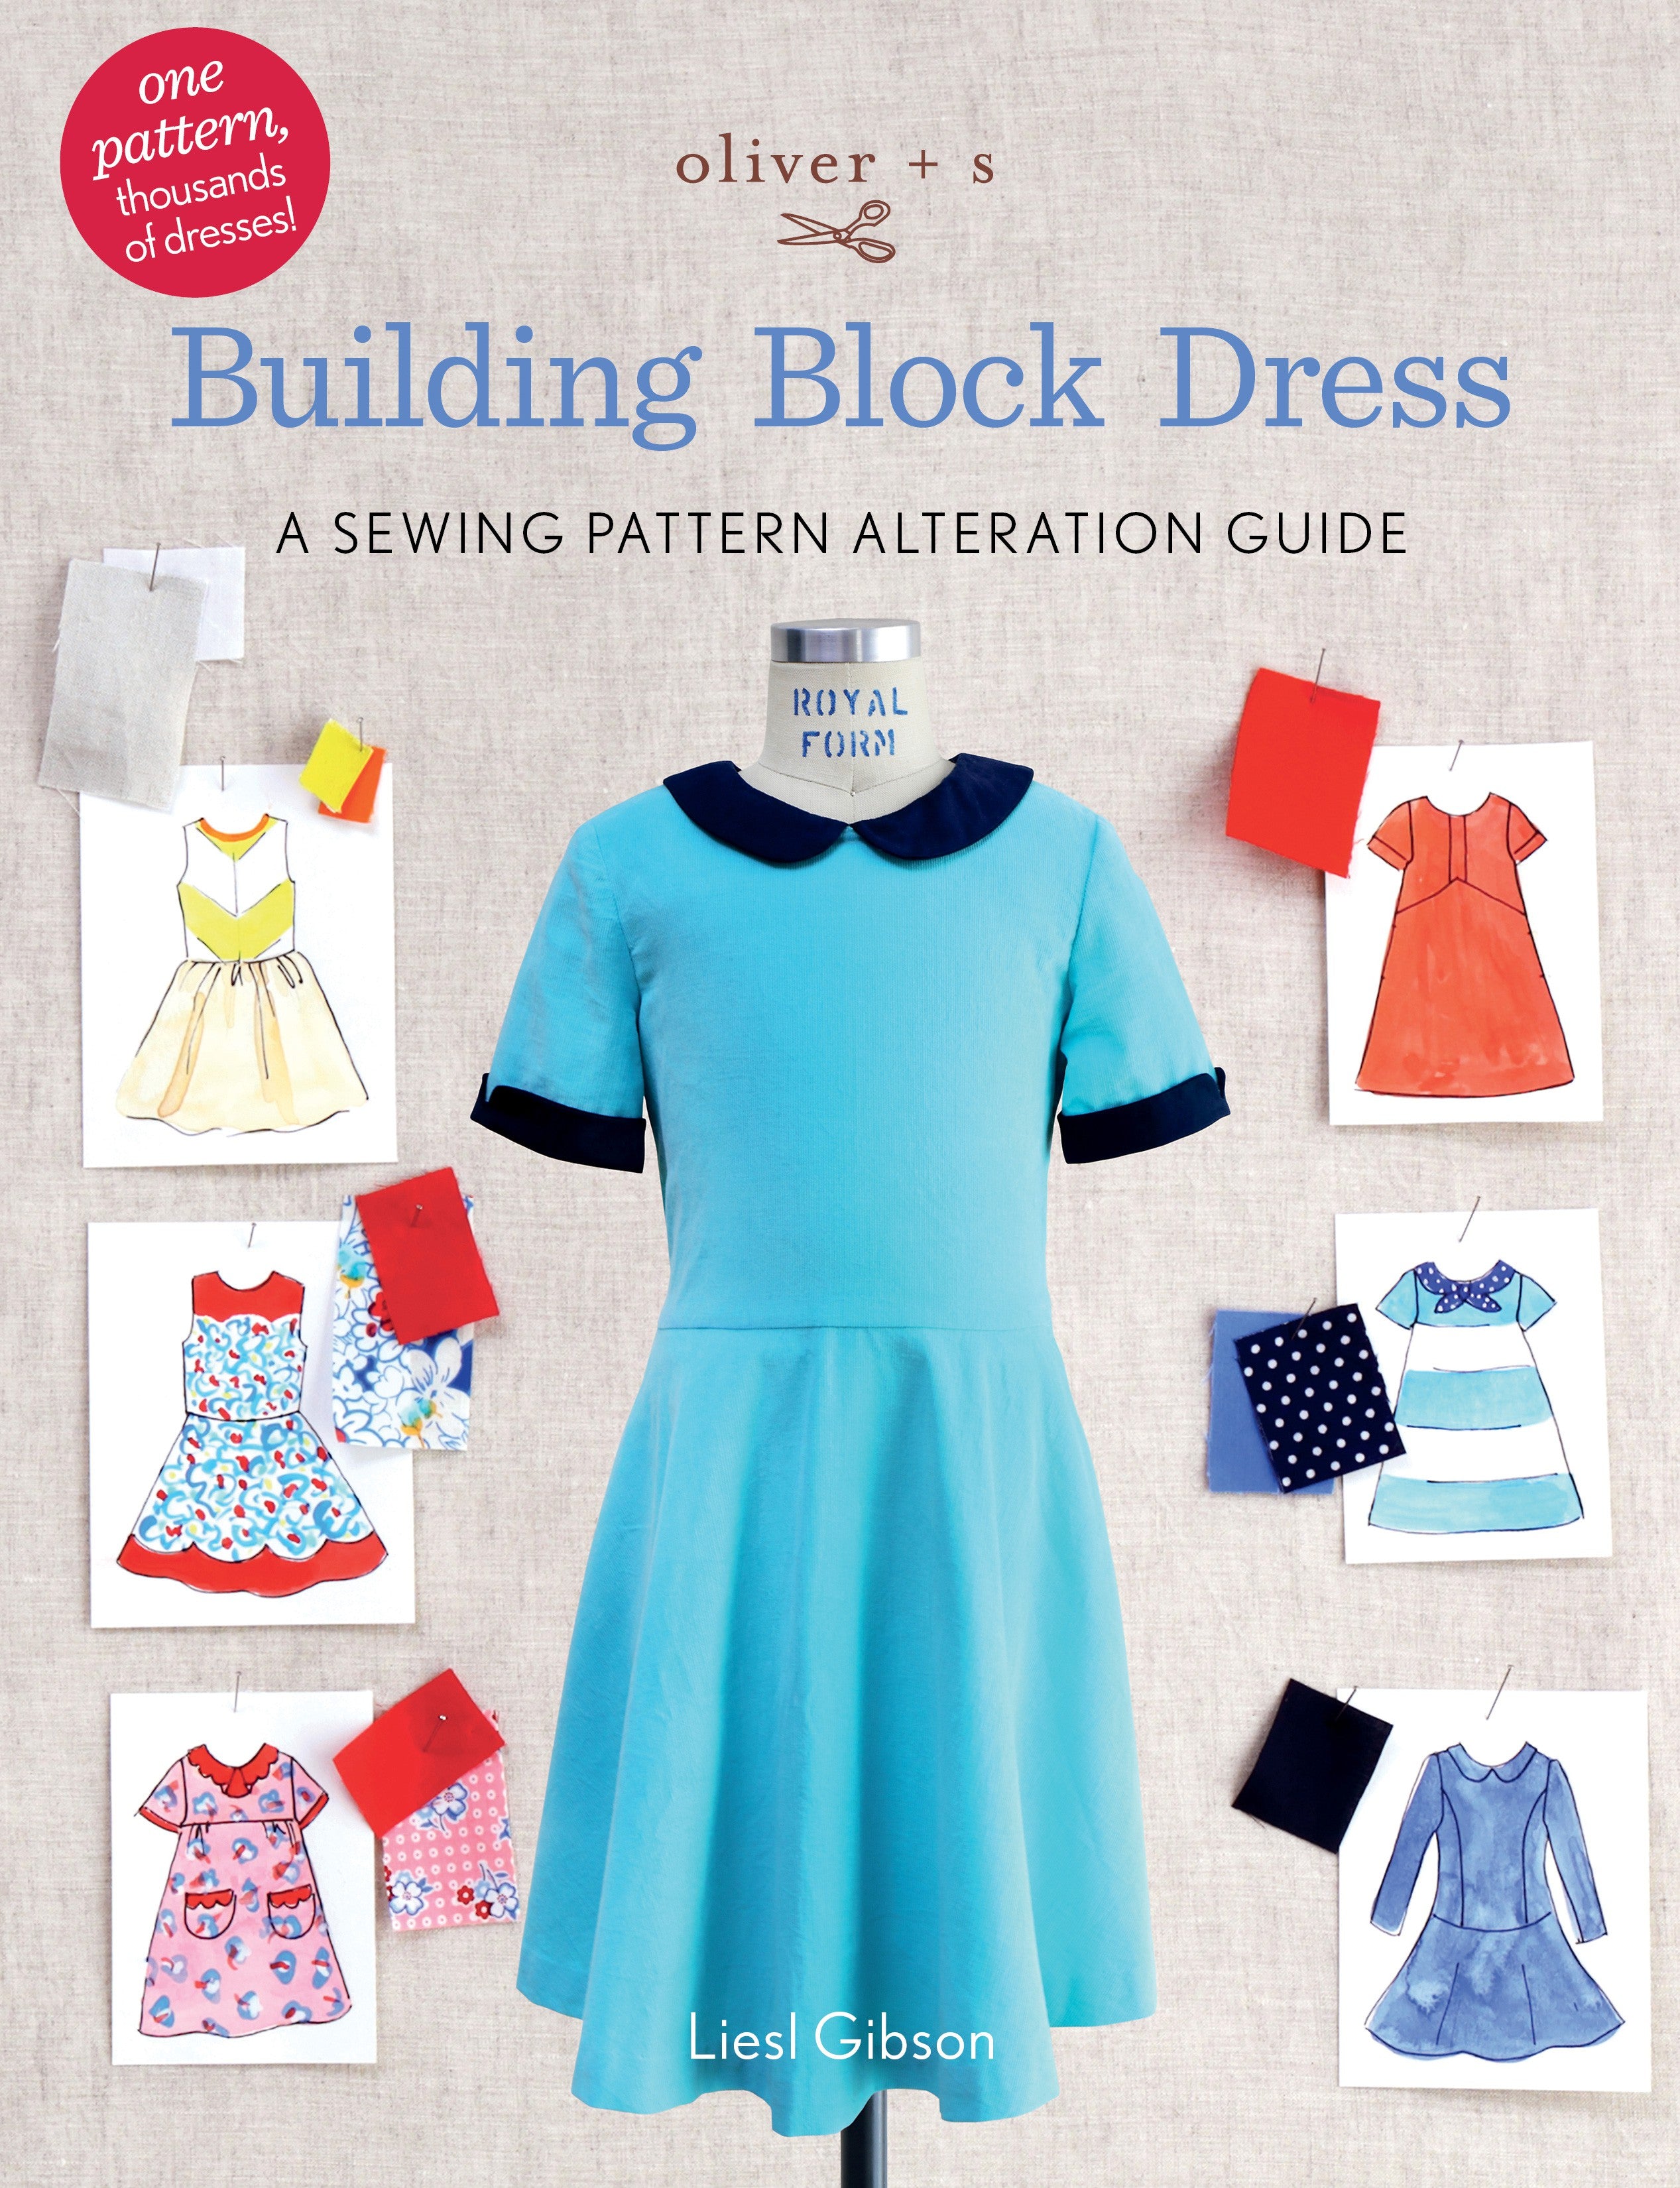 Oliver + S Building Block Dress Sewing Pattern Guide Book by Liesl Gibson for Liesl and Co.